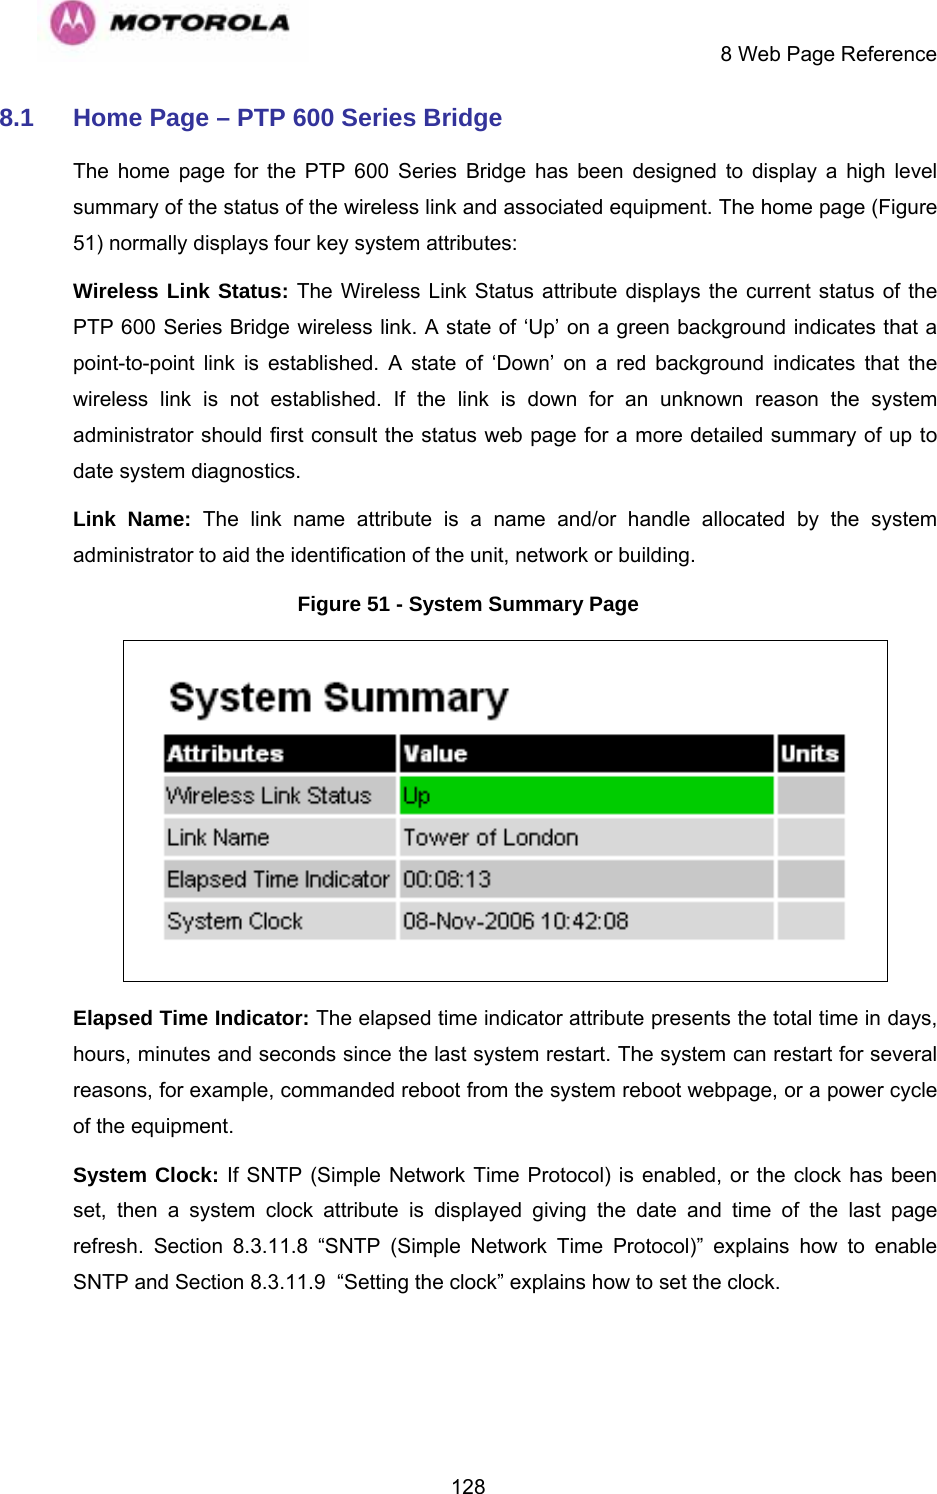     8 Web Page Reference  1288.1  Home Page – PTP 600 Series Bridge  The home page for the PTP 600 Series Bridge has been designed to display a high level summary of the status of the wireless link and associated equipment. The home page (Figure 51) normally displays four key system attributes: Wireless Link Status: The Wireless Link Status attribute displays the current status of the PTP 600 Series Bridge wireless link. A state of ‘Up’ on a green background indicates that a point-to-point link is established. A state of ‘Down’ on a red background indicates that the wireless link is not established. If the link is down for an unknown reason the system administrator should first consult the status web page for a more detailed summary of up to date system diagnostics.  Link Name: The link name attribute is a name and/or handle allocated by the system administrator to aid the identification of the unit, network or building.  Figure 51 - System Summary Page  Elapsed Time Indicator: The elapsed time indicator attribute presents the total time in days, hours, minutes and seconds since the last system restart. The system can restart for several reasons, for example, commanded reboot from the system reboot webpage, or a power cycle of the equipment.  System Clock: If SNTP (Simple Network Time Protocol) is enabled, or the clock has been set, then a system clock attribute is displayed giving the date and time of the last page refresh. Section 8.3.11.8 “SNTP (Simple Network Time Protocol)” explains how to enable SNTP and Section 8.3.11.9  “Setting the clock” explains how to set the clock. 